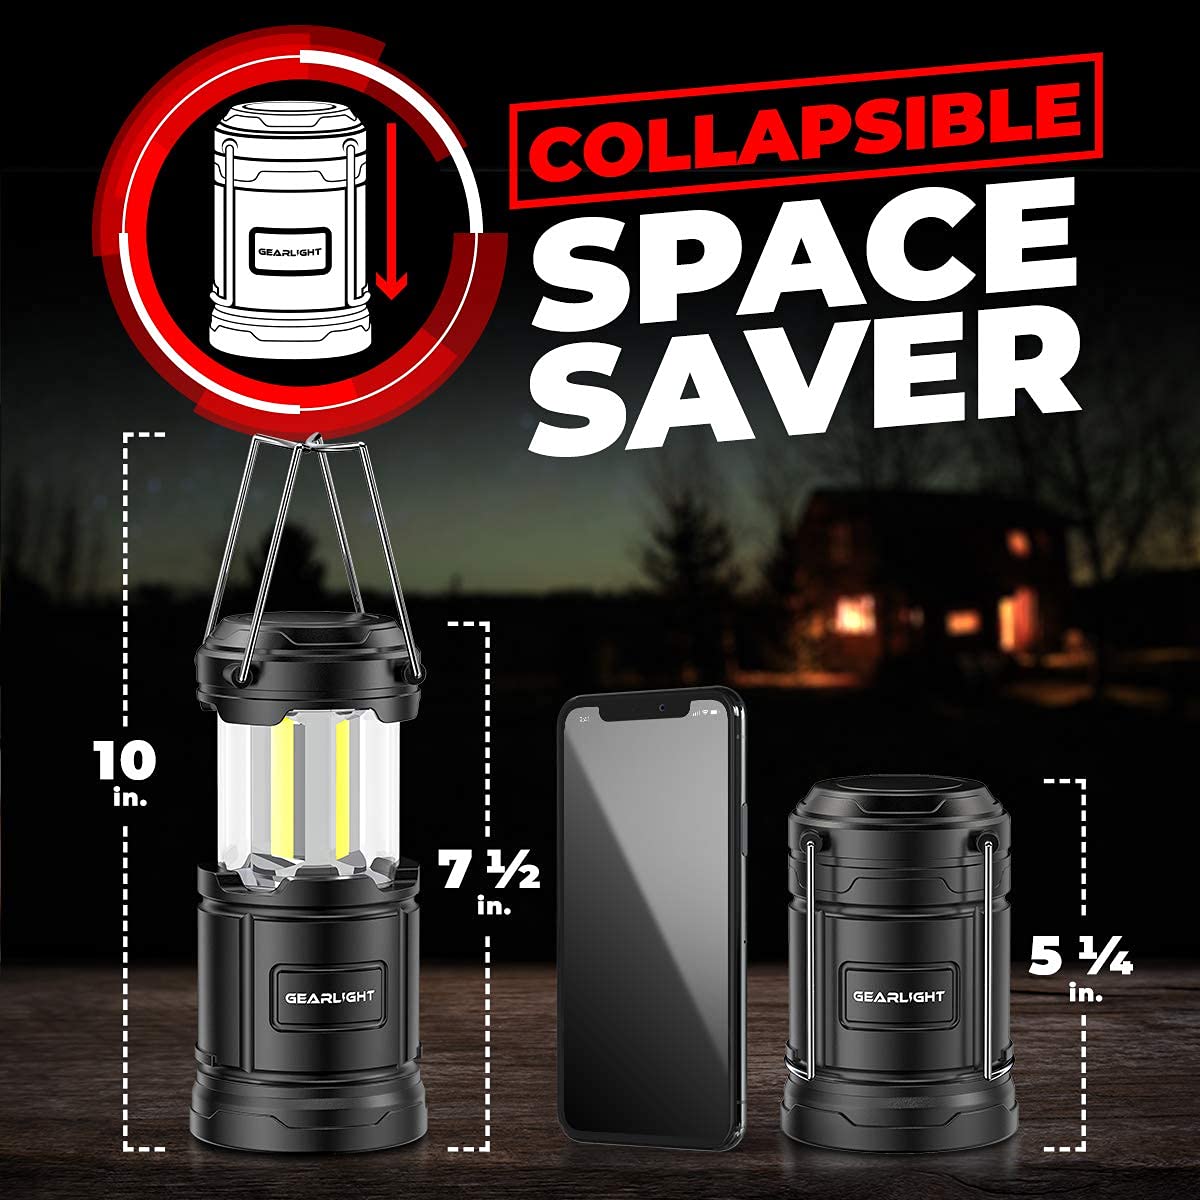 GearLight Camping Lantern - 2 Portable, LED Battery Powered Lamp Lights, Magnetic Base and Foldable Hook for Emergency Use or Campsites